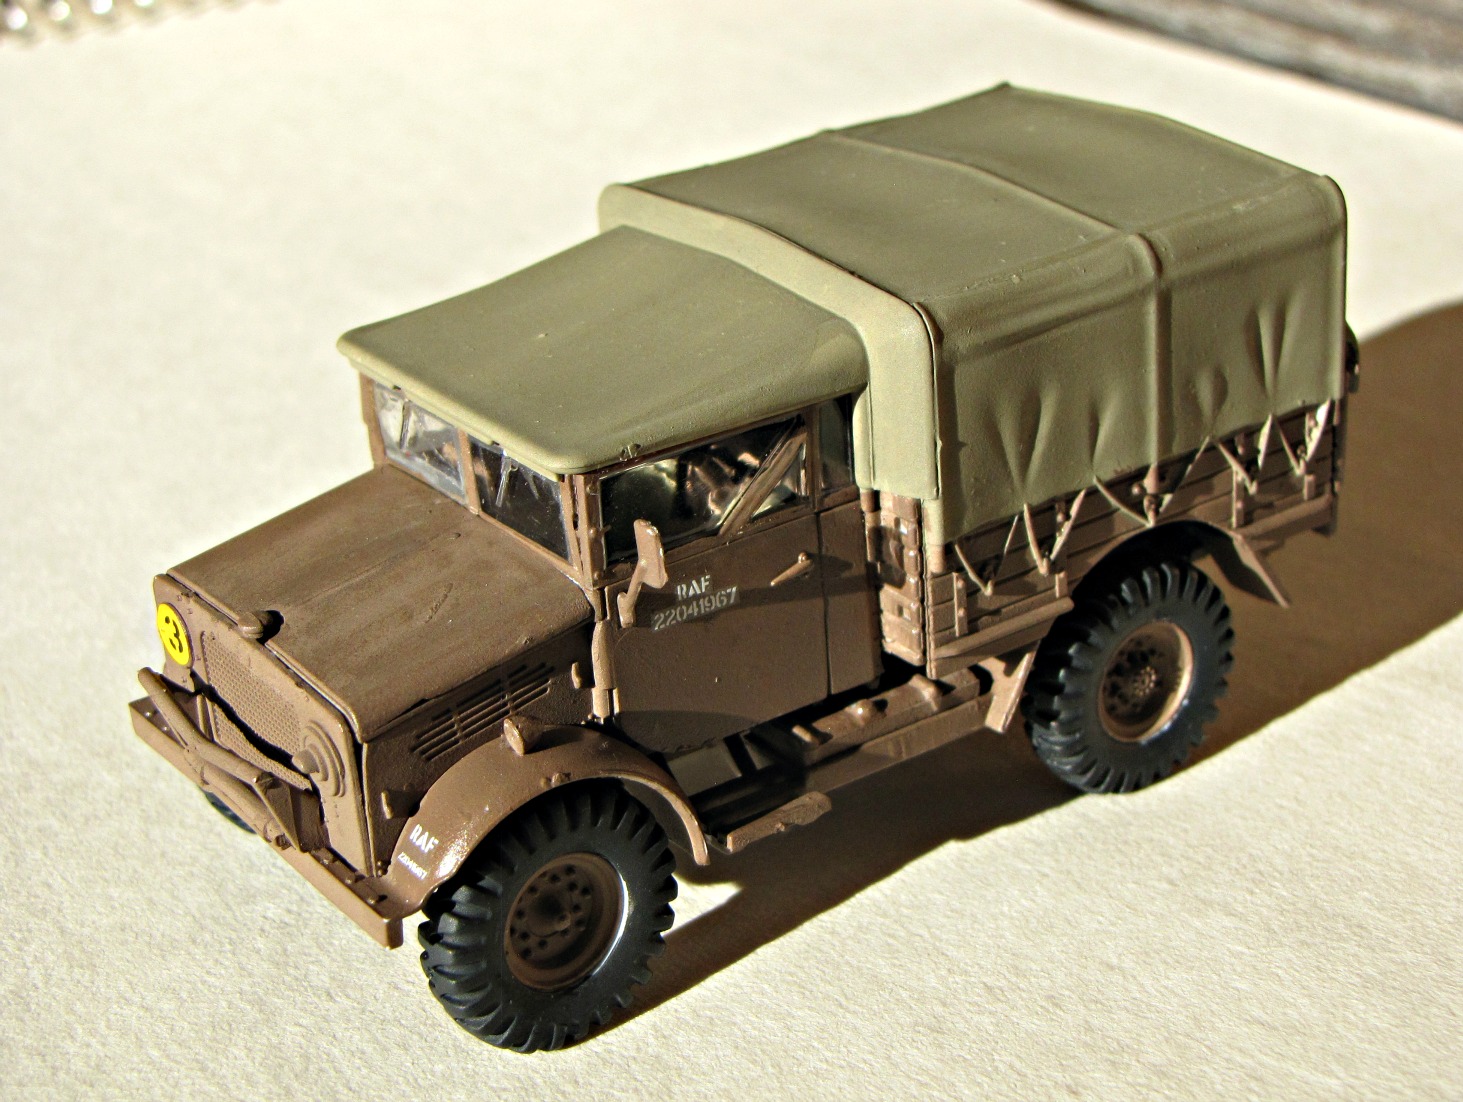 Airfix Bedford Mwd Light Truck Early & Late Airfield Vehicle 1:48 Model Kit